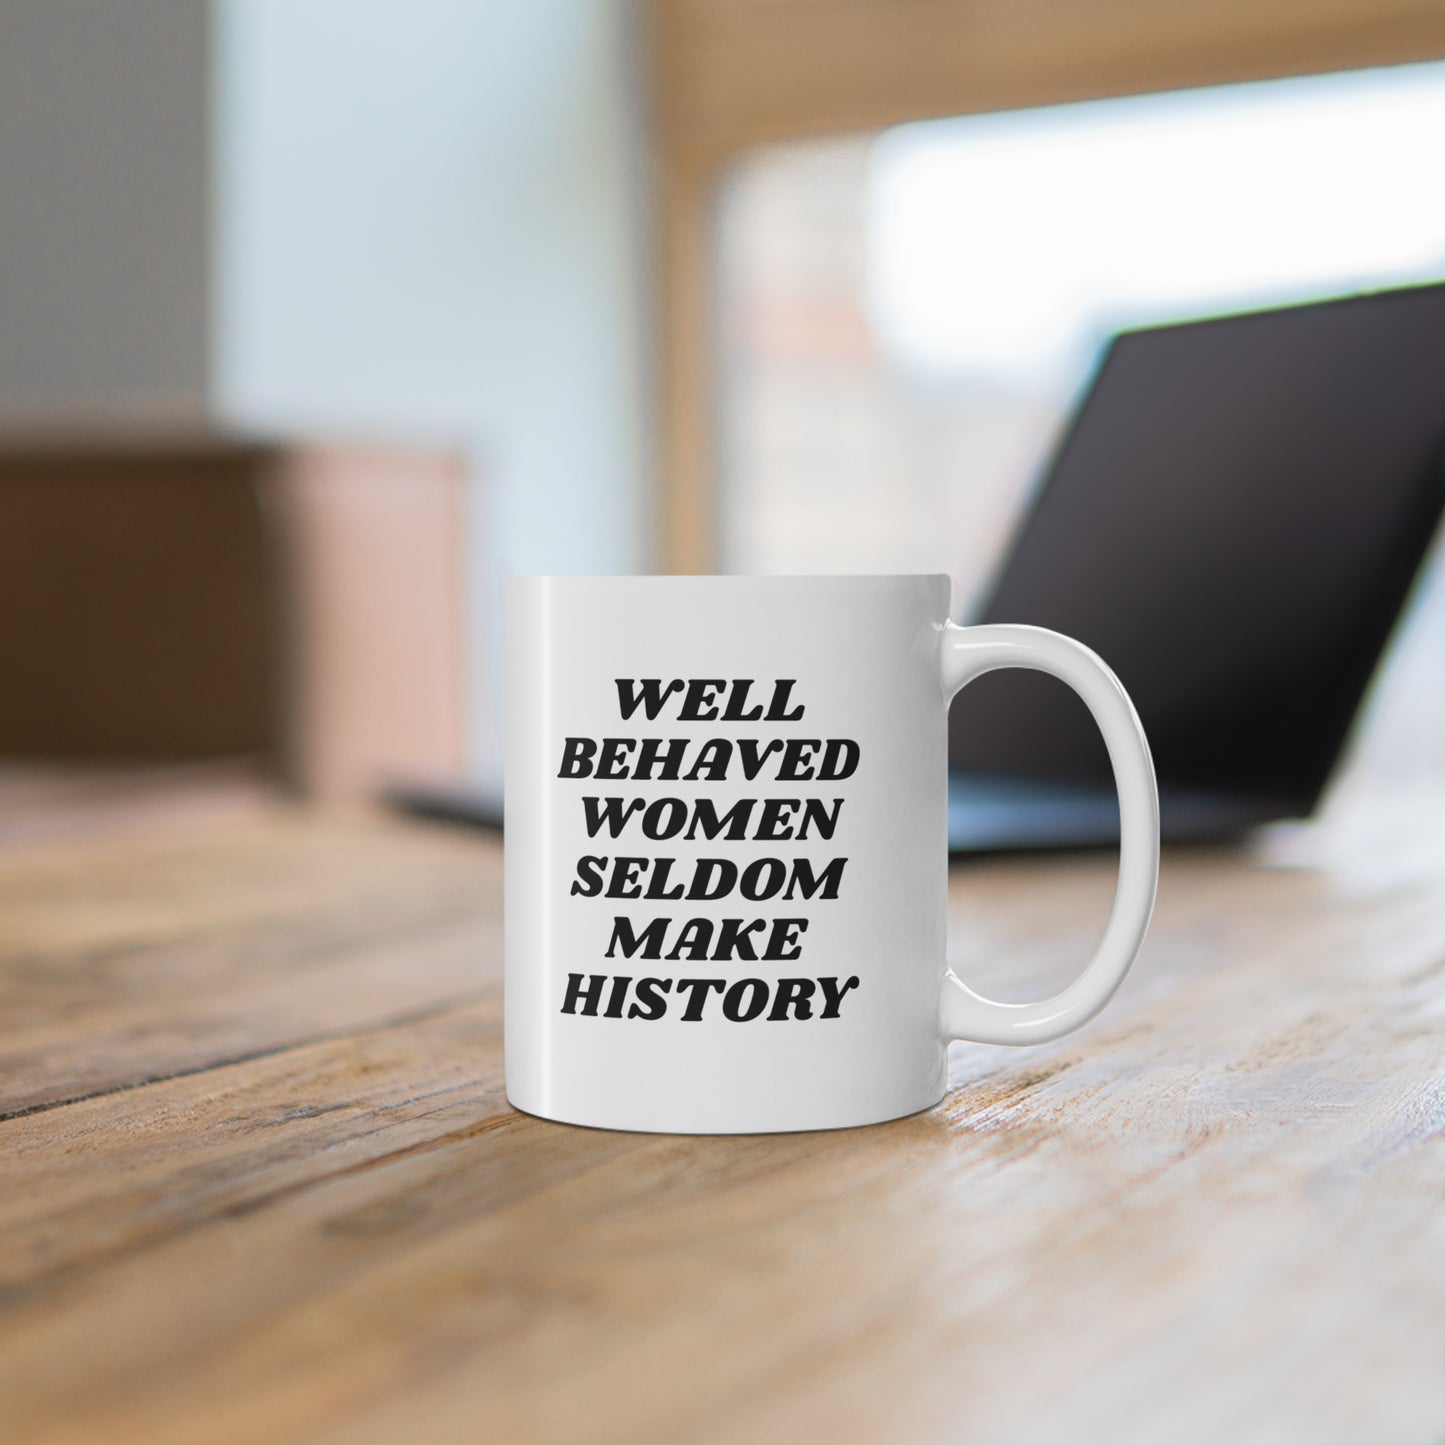 11oz ceramic mug with quote Well behaved women seldom make history